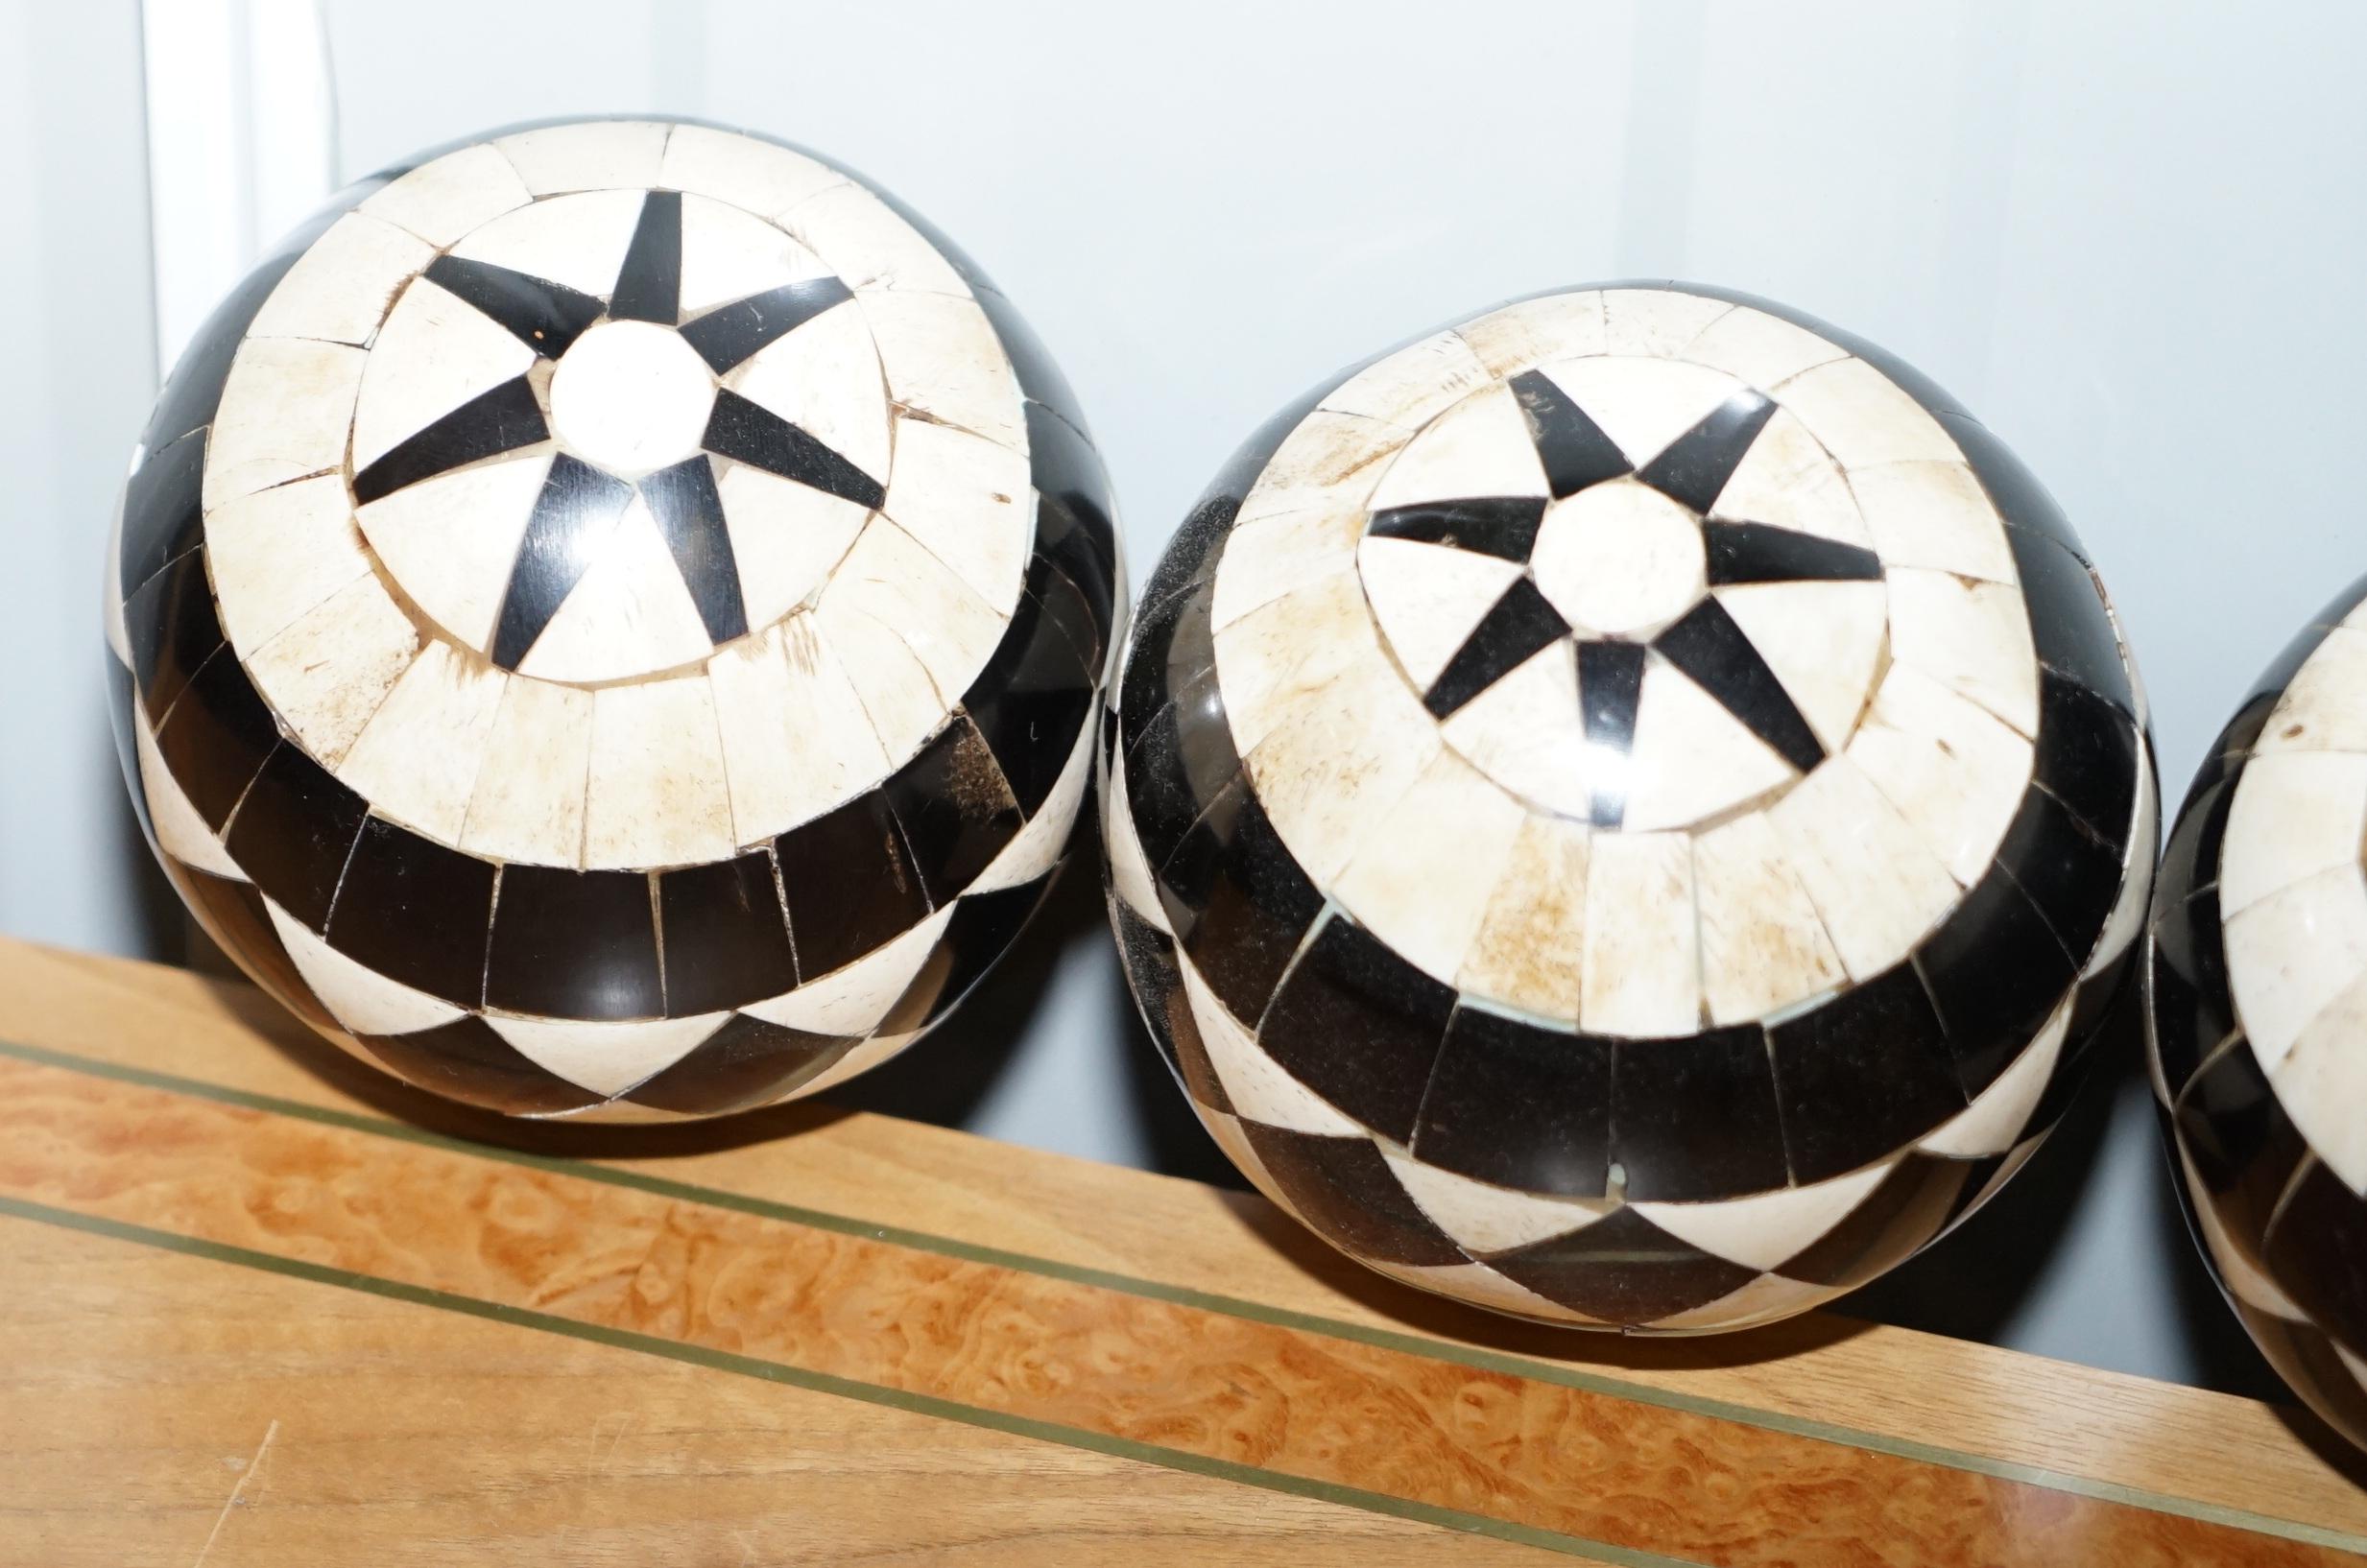 We are delighted to offer for sale this lovely set of three ebonised bone and horn decorative balls

A good looking and well made set, ideally suited for decorative or a careful juggler!

Dimensions

Height 12cm

Width 12cm

Depth